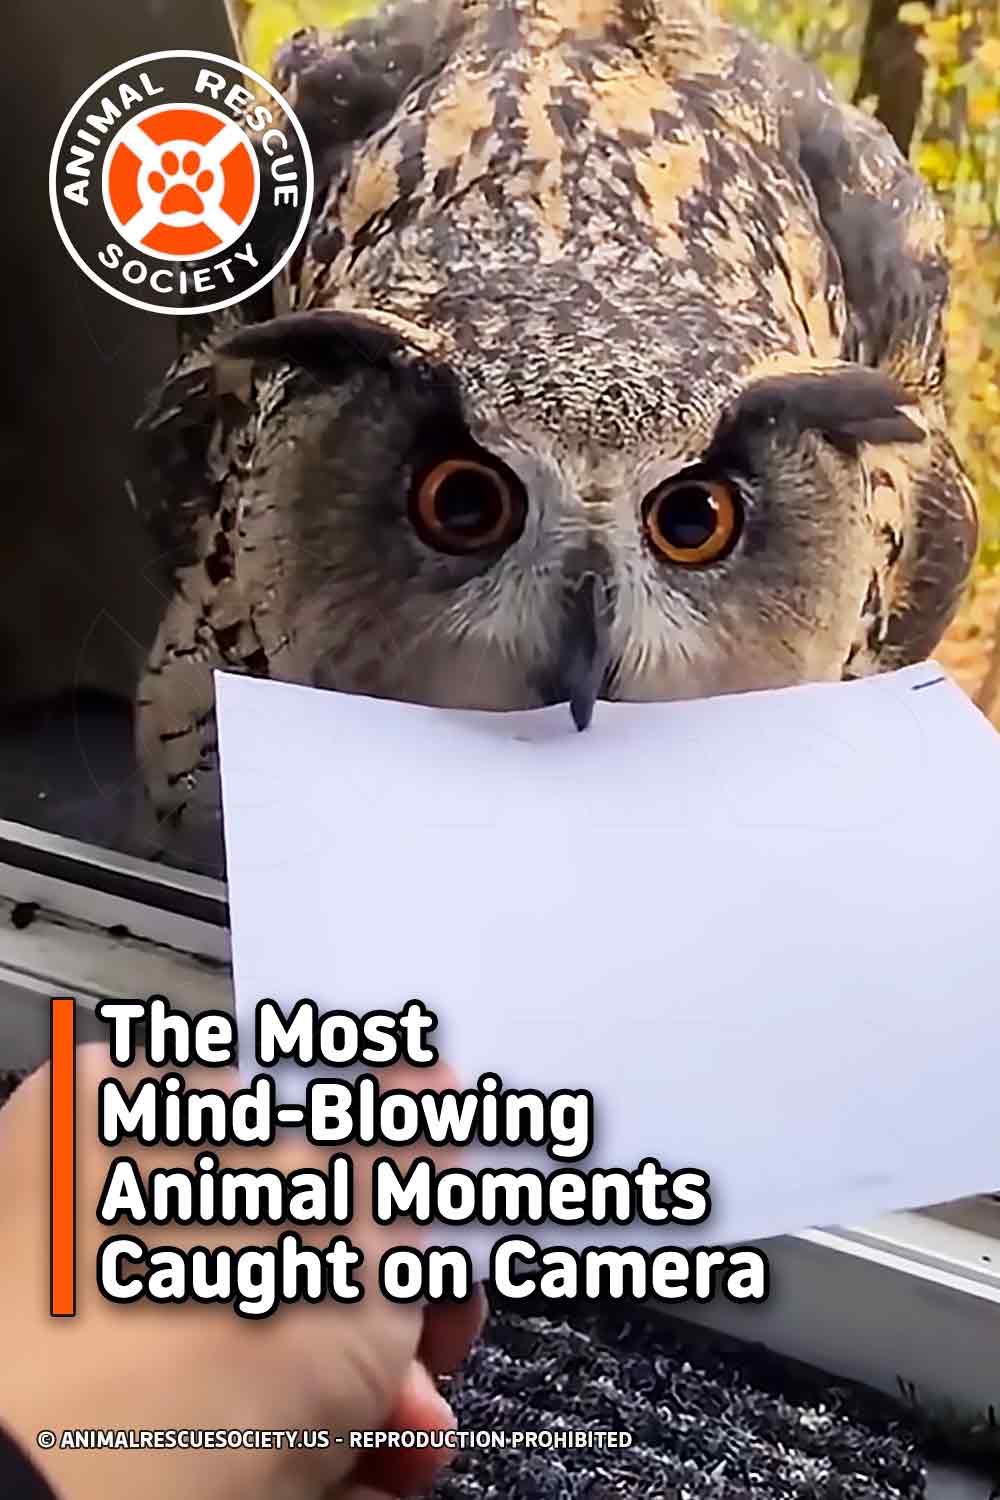 The Most Mind-Blowing Animal Moments Caught on Camera